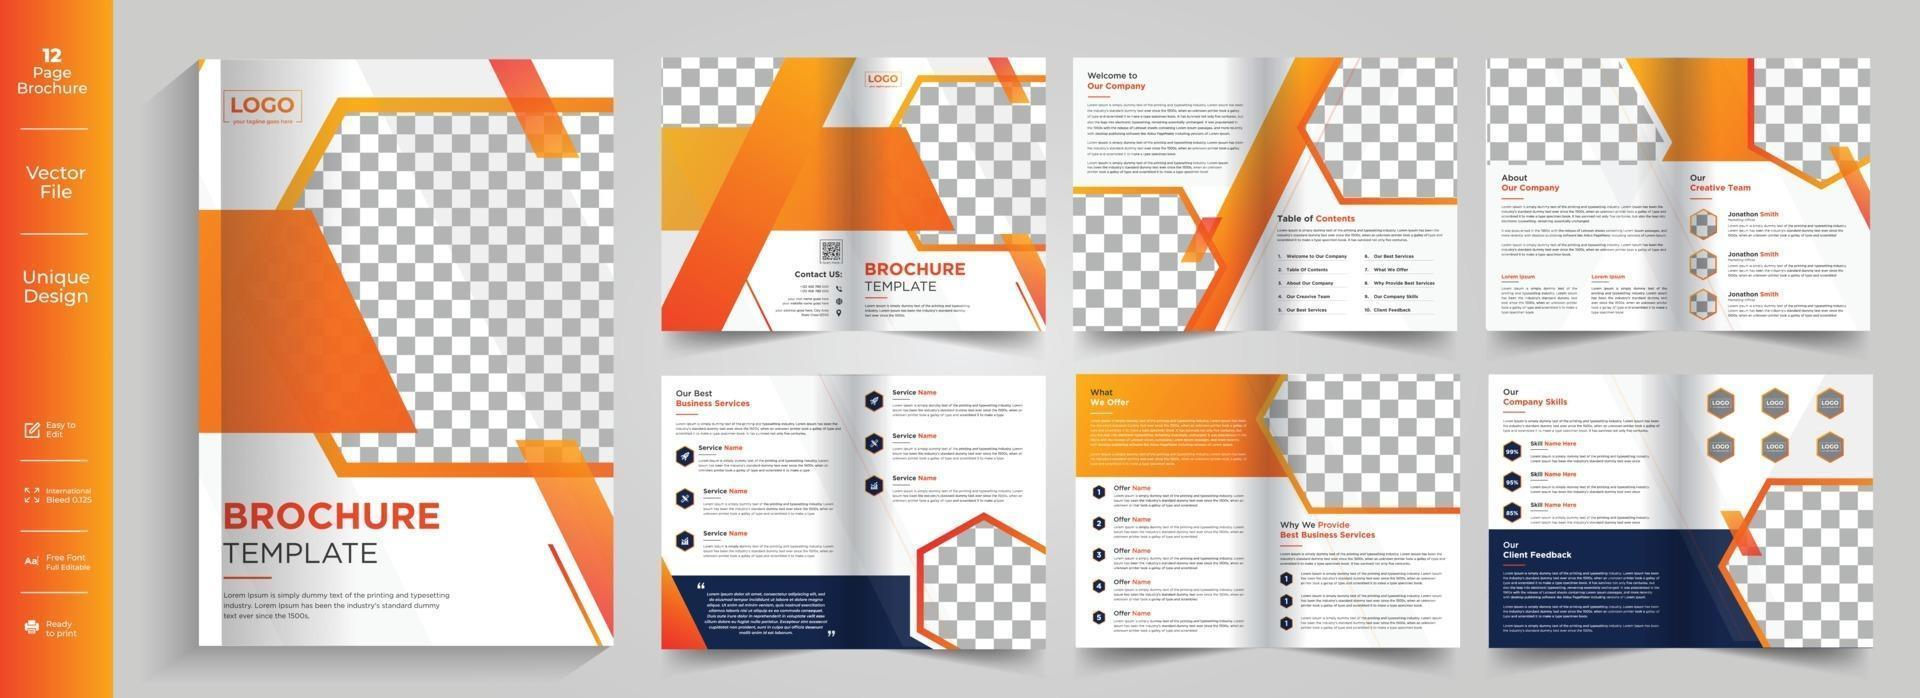 corporate theme 10 pages business company profile brochure design  For 12 Page Brochure Template